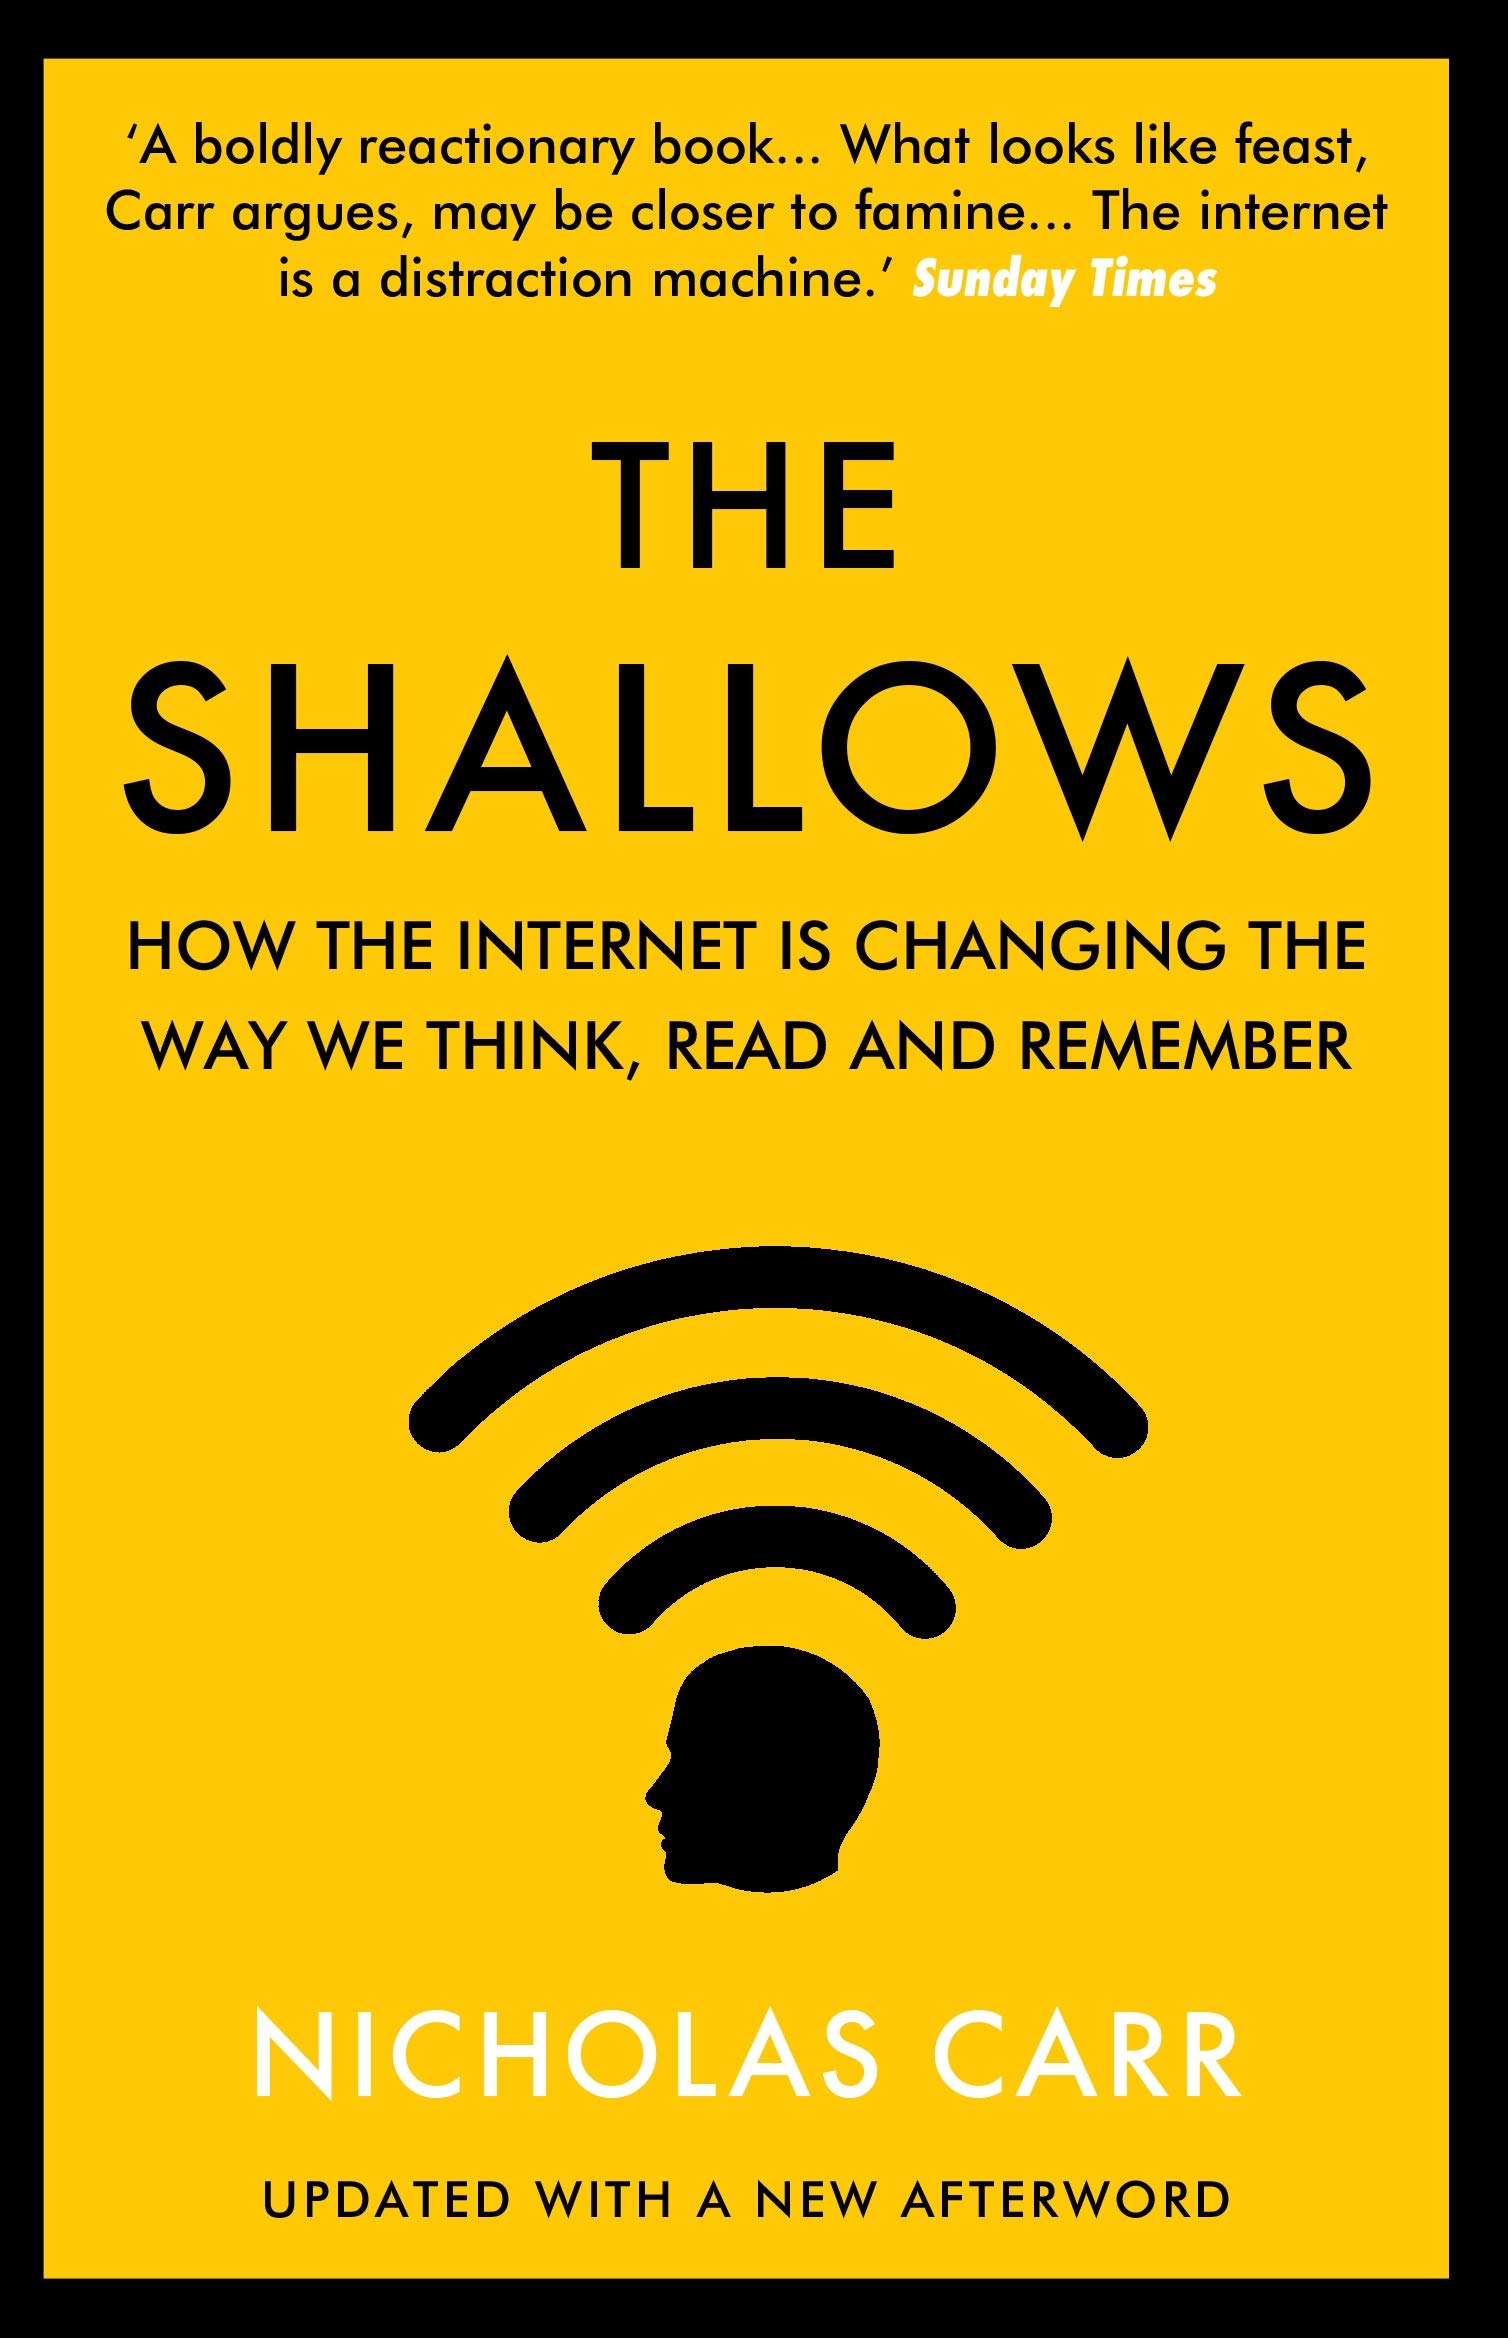 Carr N. - The Shallows: How the Internet Is Changing the Way We Think, Read and Remember